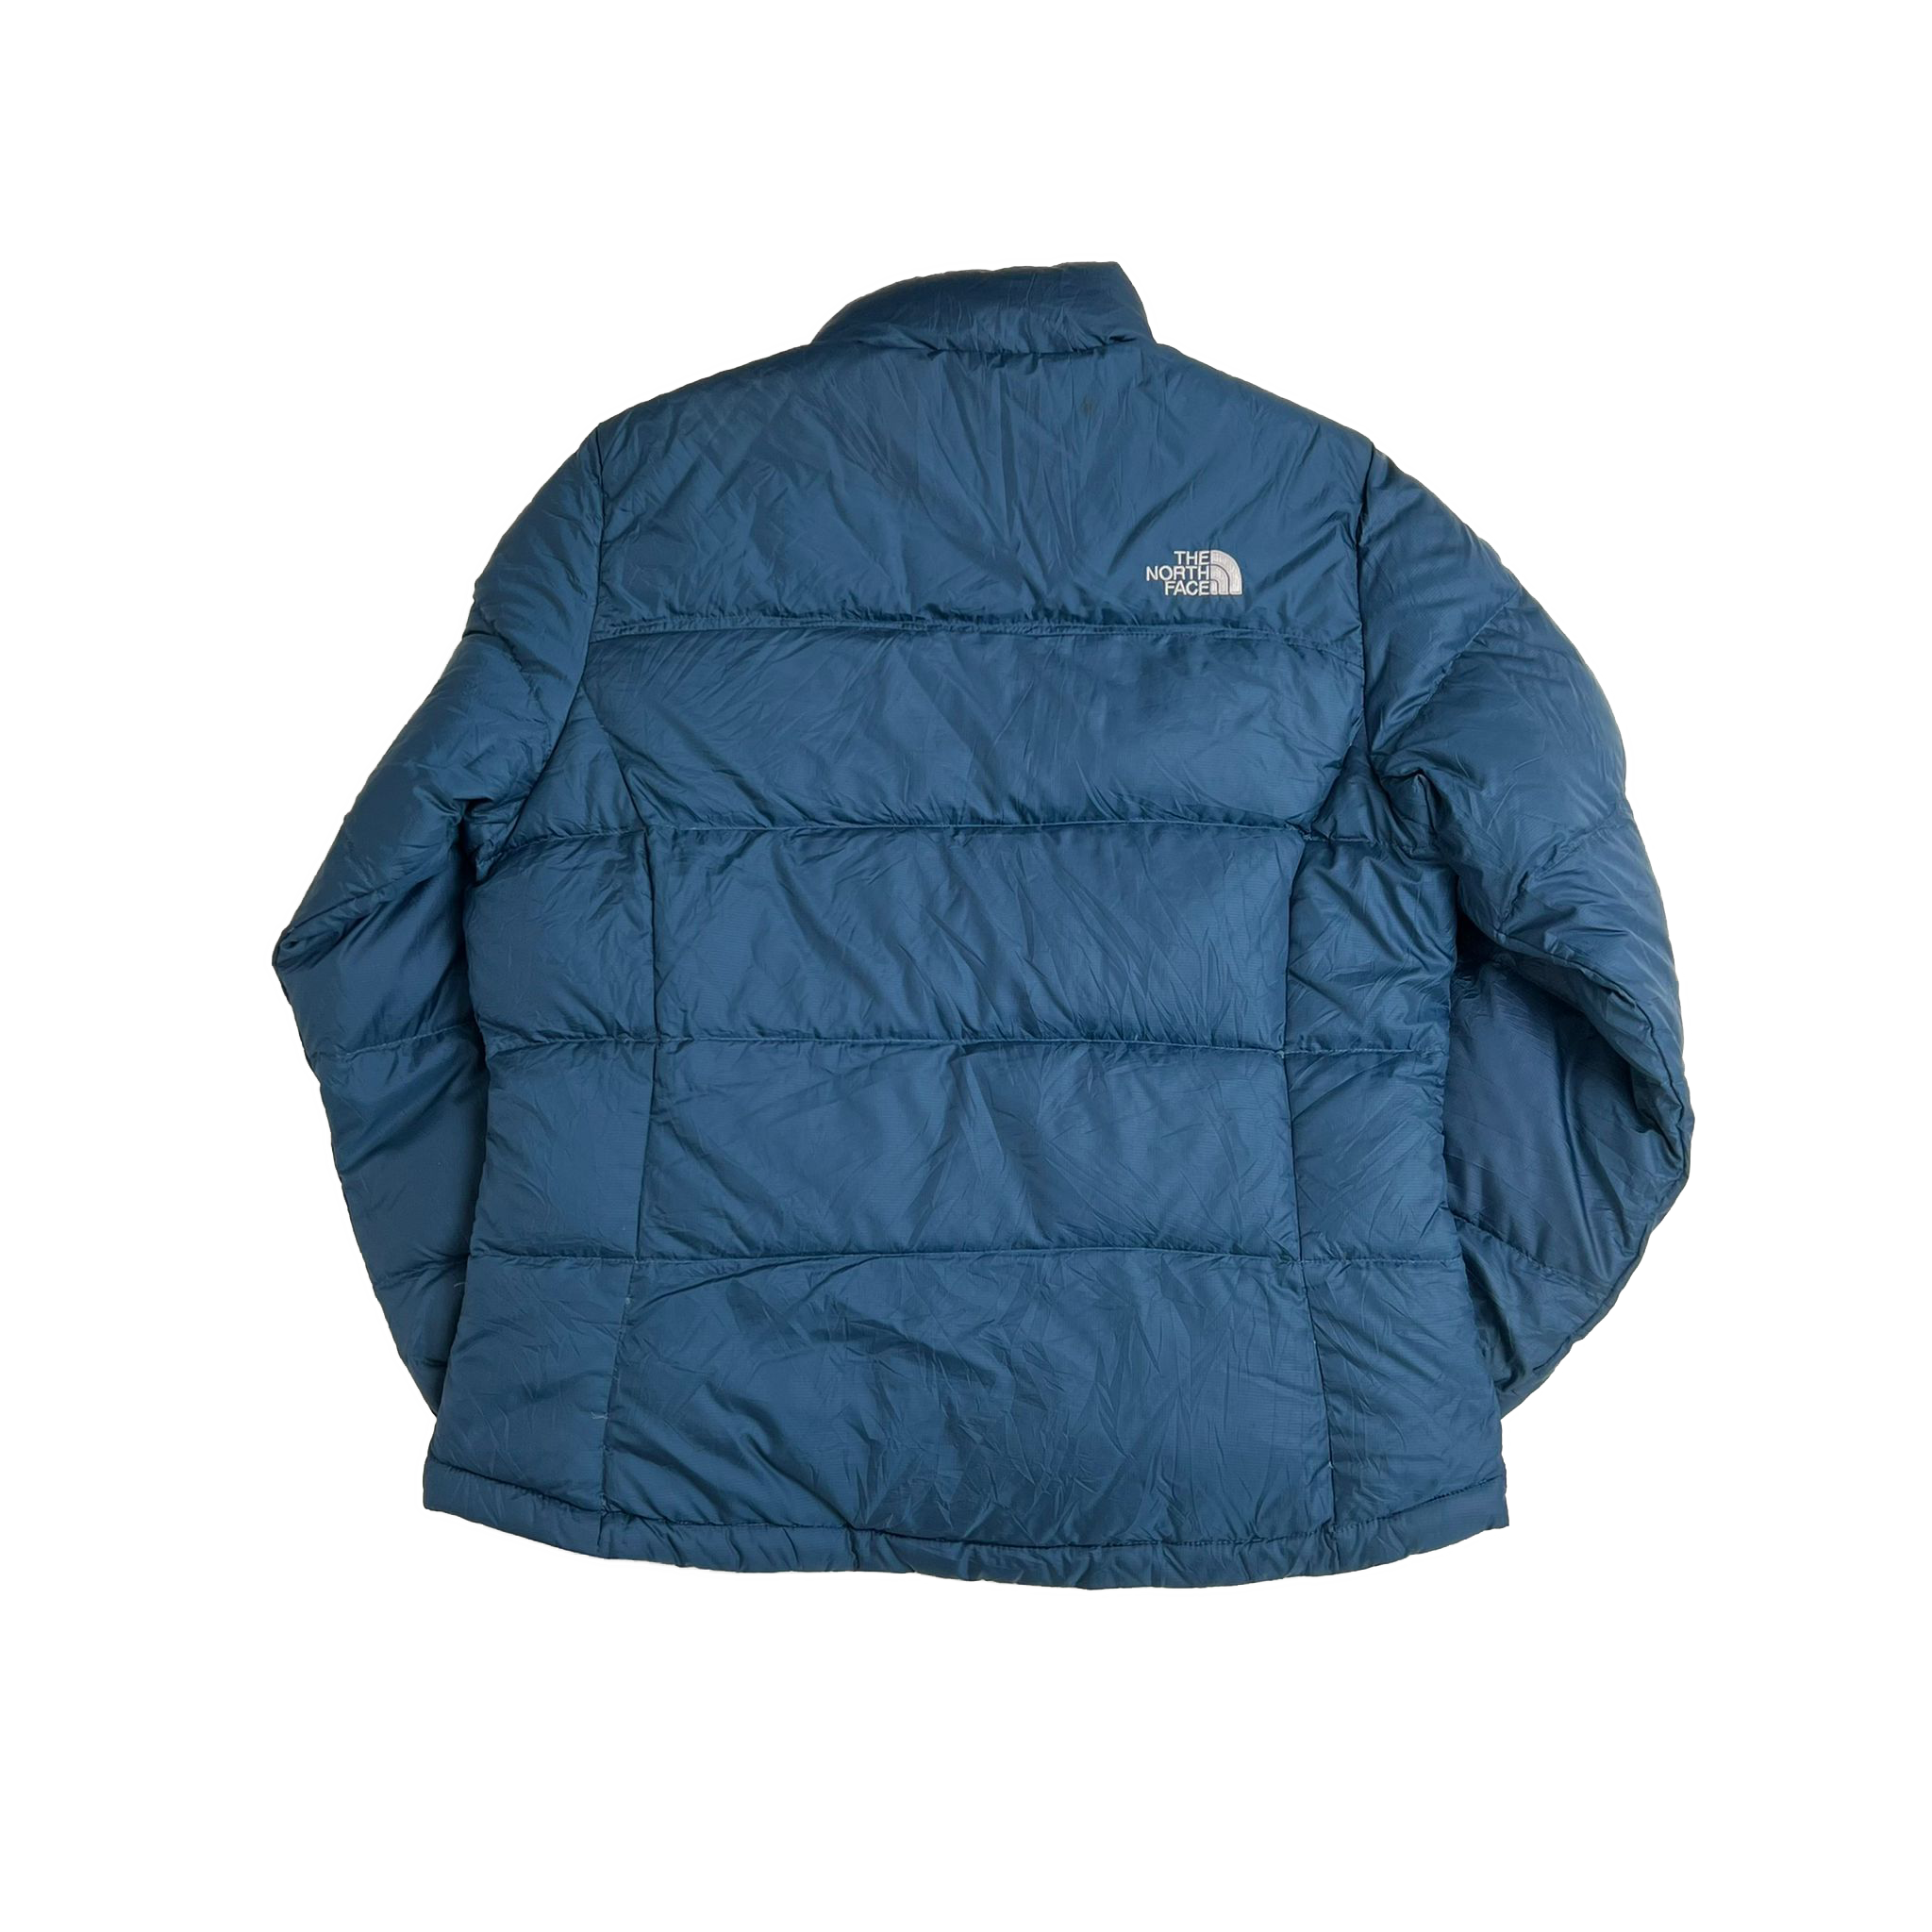 Women's The North Face 700 puffer